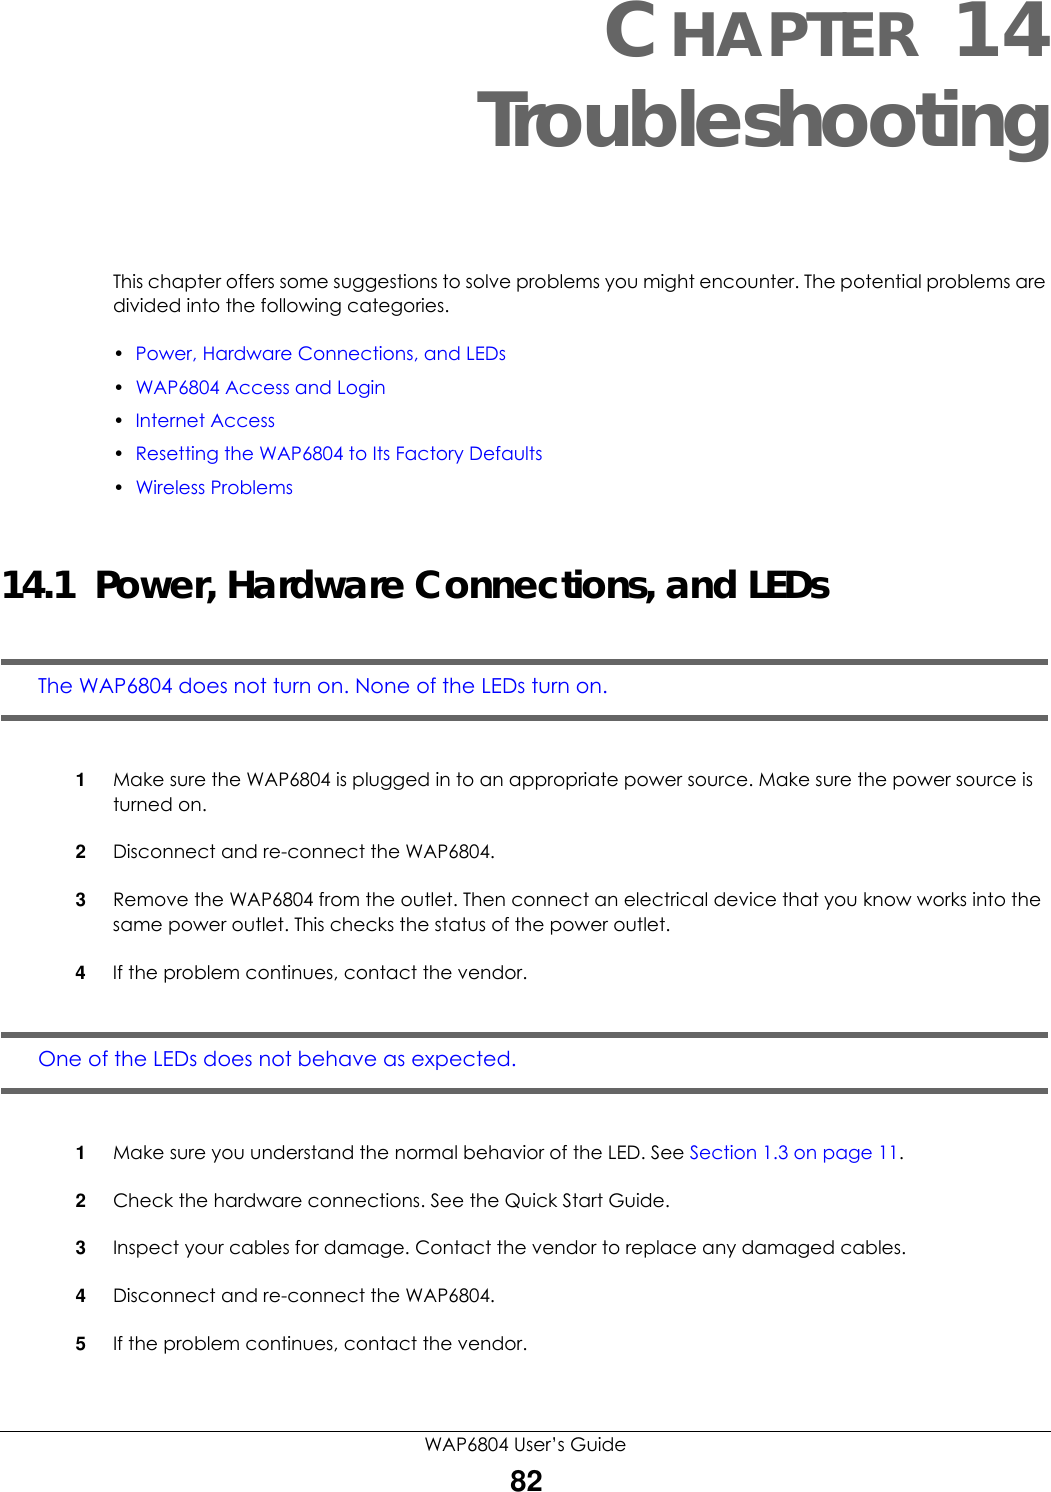 WAP6804 User’s Guide82CHAPTER 14TroubleshootingThis chapter offers some suggestions to solve problems you might encounter. The potential problems are divided into the following categories. •Power, Hardware Connections, and LEDs•WAP6804 Access and Login•Internet Access•Resetting the WAP6804 to Its Factory Defaults•Wireless Problems14.1  Power, Hardware Connections, and LEDsThe WAP6804 does not turn on. None of the LEDs turn on.1Make sure the WAP6804 is plugged in to an appropriate power source. Make sure the power source is turned on.2Disconnect and re-connect the WAP6804.3Remove the WAP6804 from the outlet. Then connect an electrical device that you know works into the same power outlet. This checks the status of the power outlet.4If the problem continues, contact the vendor.One of the LEDs does not behave as expected.1Make sure you understand the normal behavior of the LED. See Section 1.3 on page 11.2Check the hardware connections. See the Quick Start Guide. 3Inspect your cables for damage. Contact the vendor to replace any damaged cables.4Disconnect and re-connect the WAP6804. 5If the problem continues, contact the vendor.